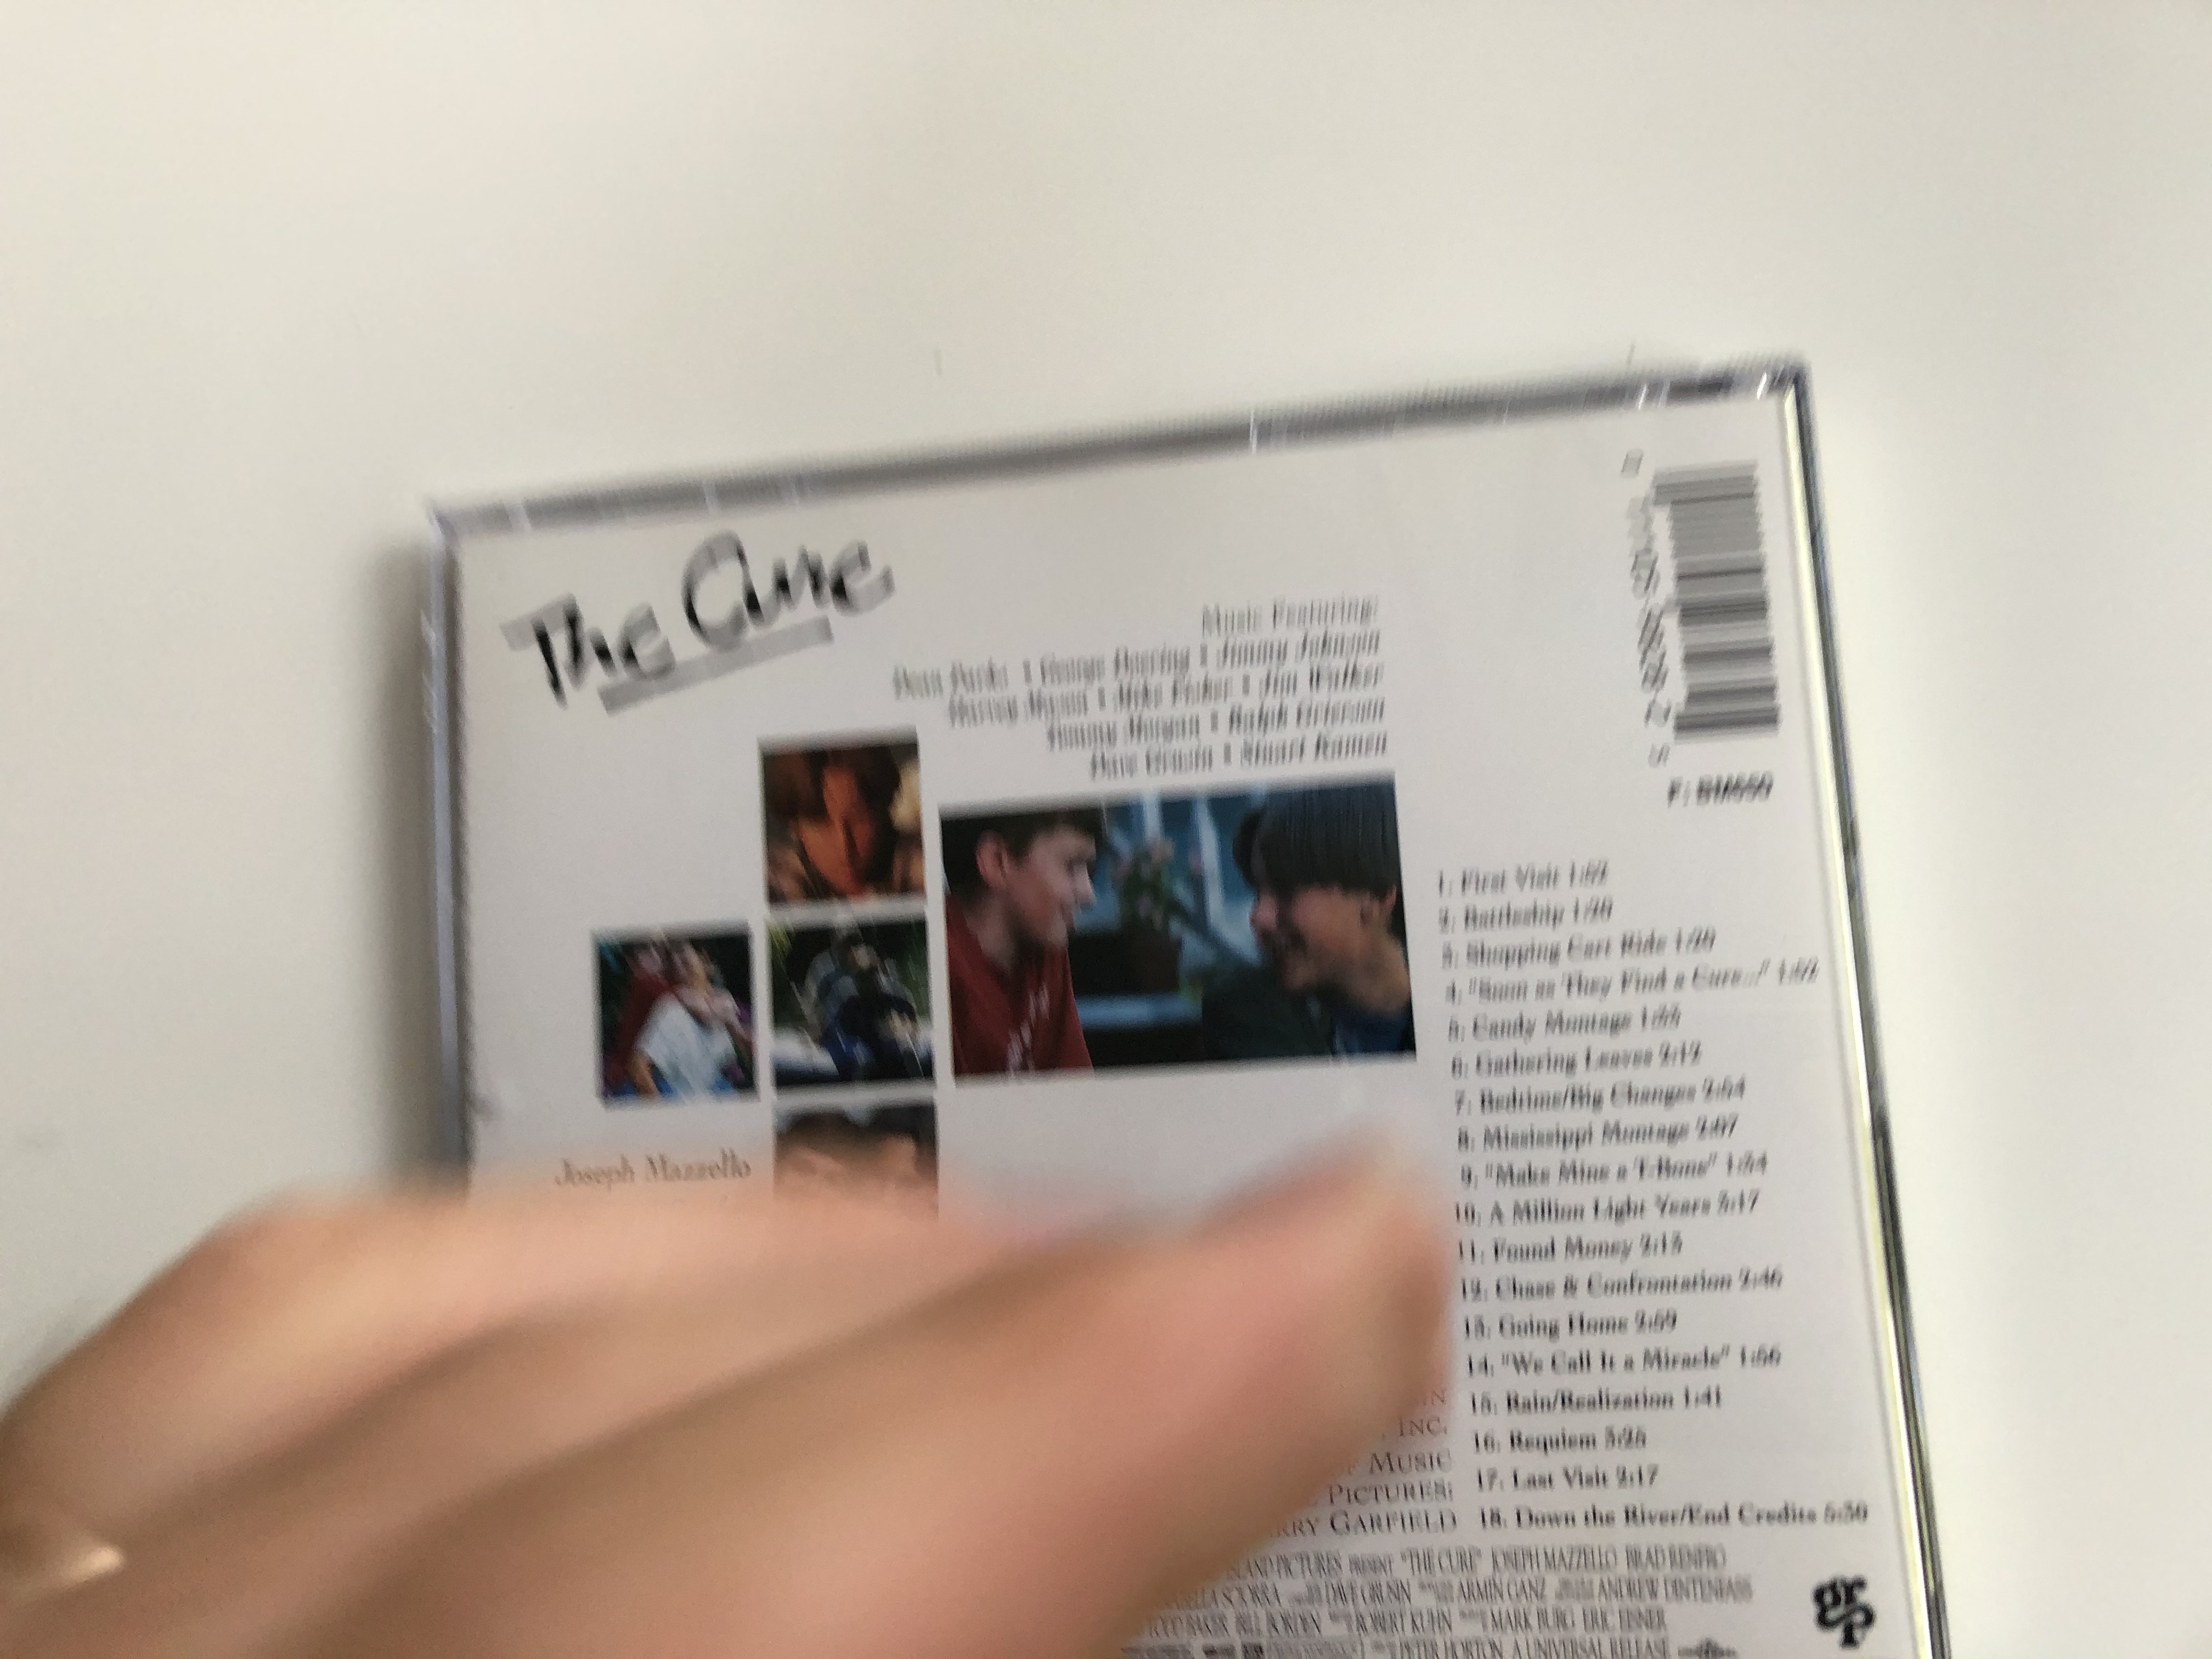 the-cure-original-motion-picture-soundtrack-music-composed-conducted-by-dave-grusin-two-boys-found-way-to-make-one-summer-lost-a-lifetime-grp-audio-cd-1995-grp-98282-6-.jpg